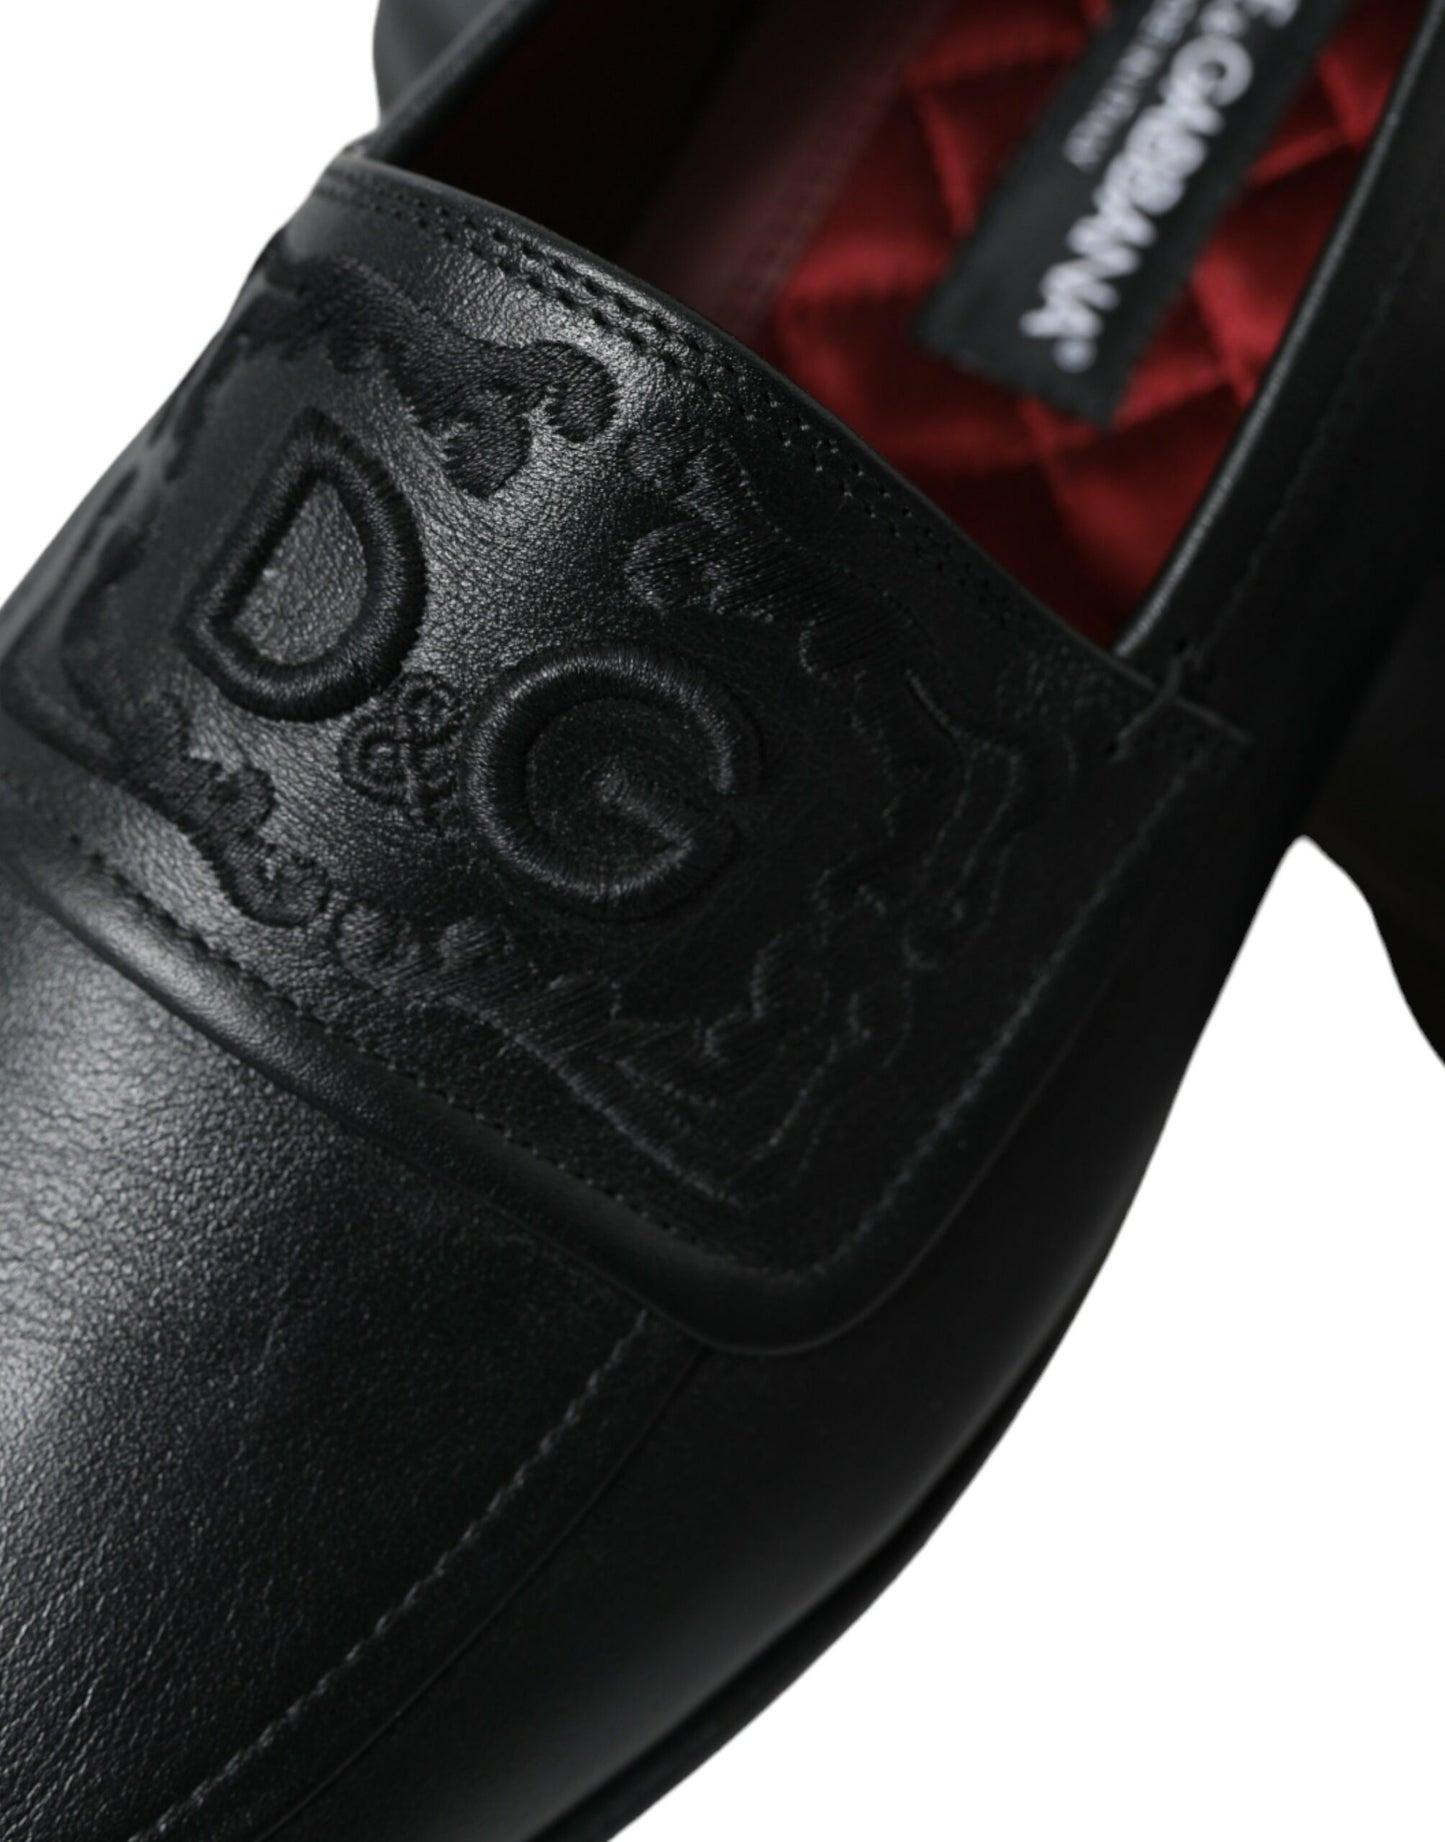 Dolce & gabbana black embroidered loafers